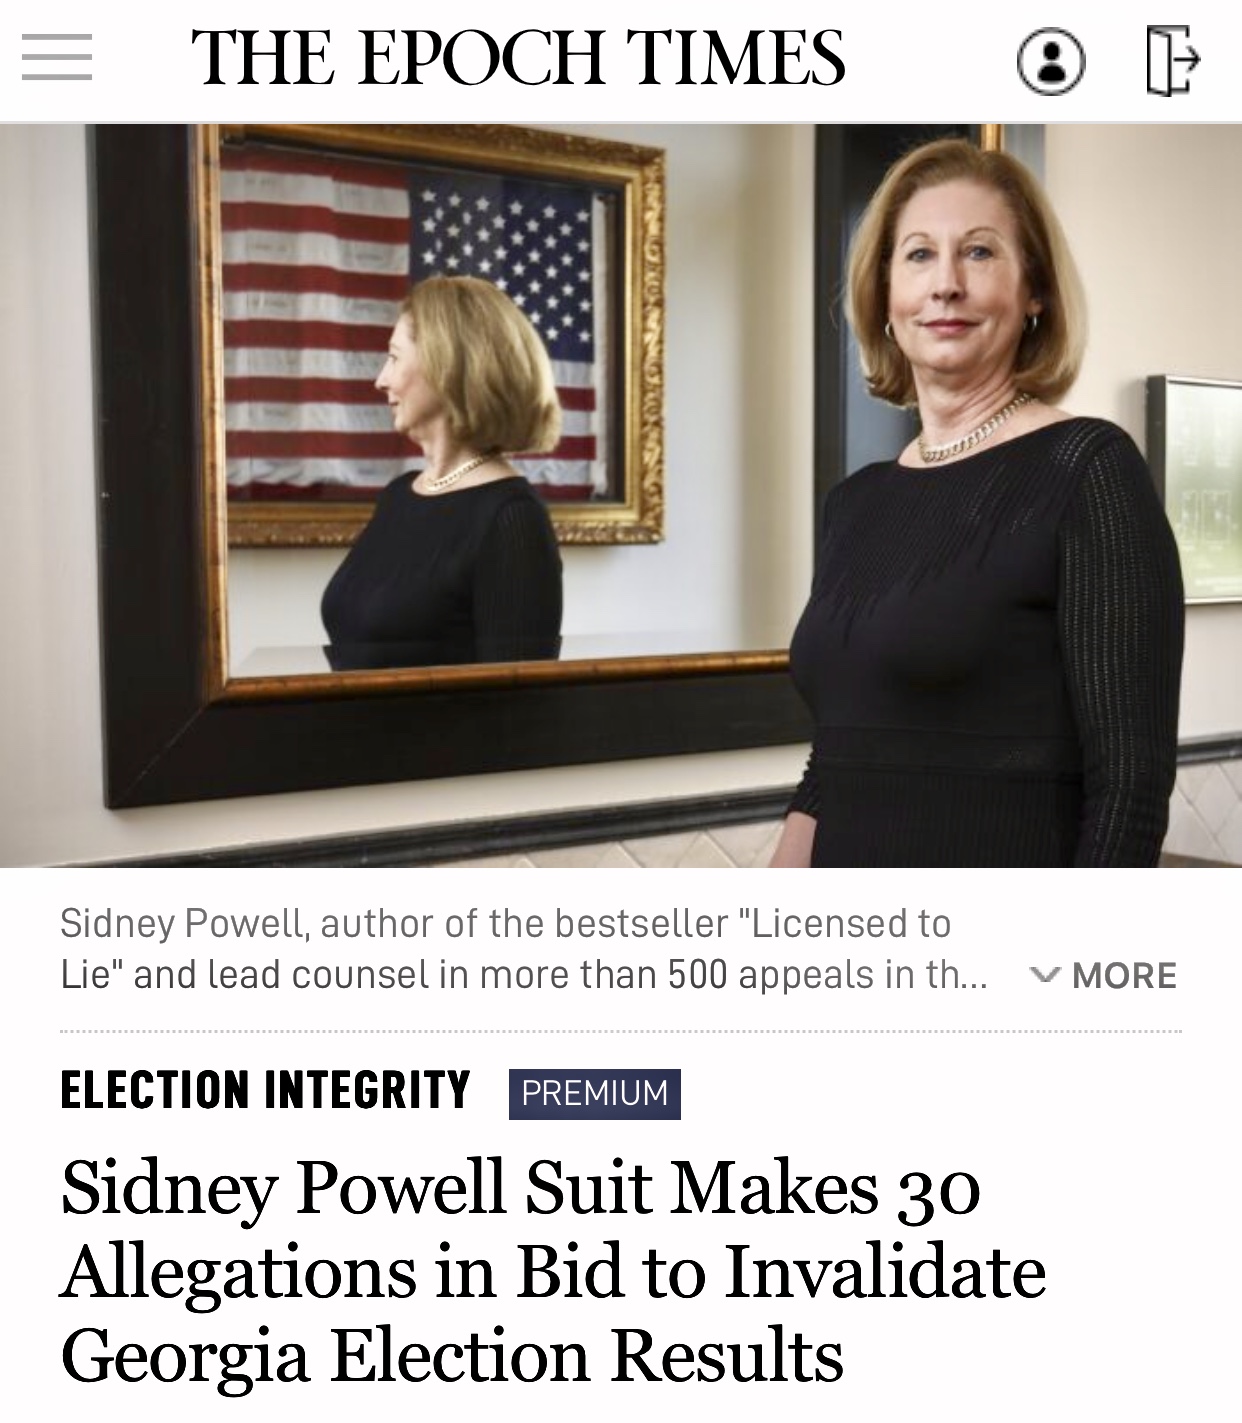 Sidney Powell Suit Makes 30 Allegations in Bid to Invalidate Georgia Election Results